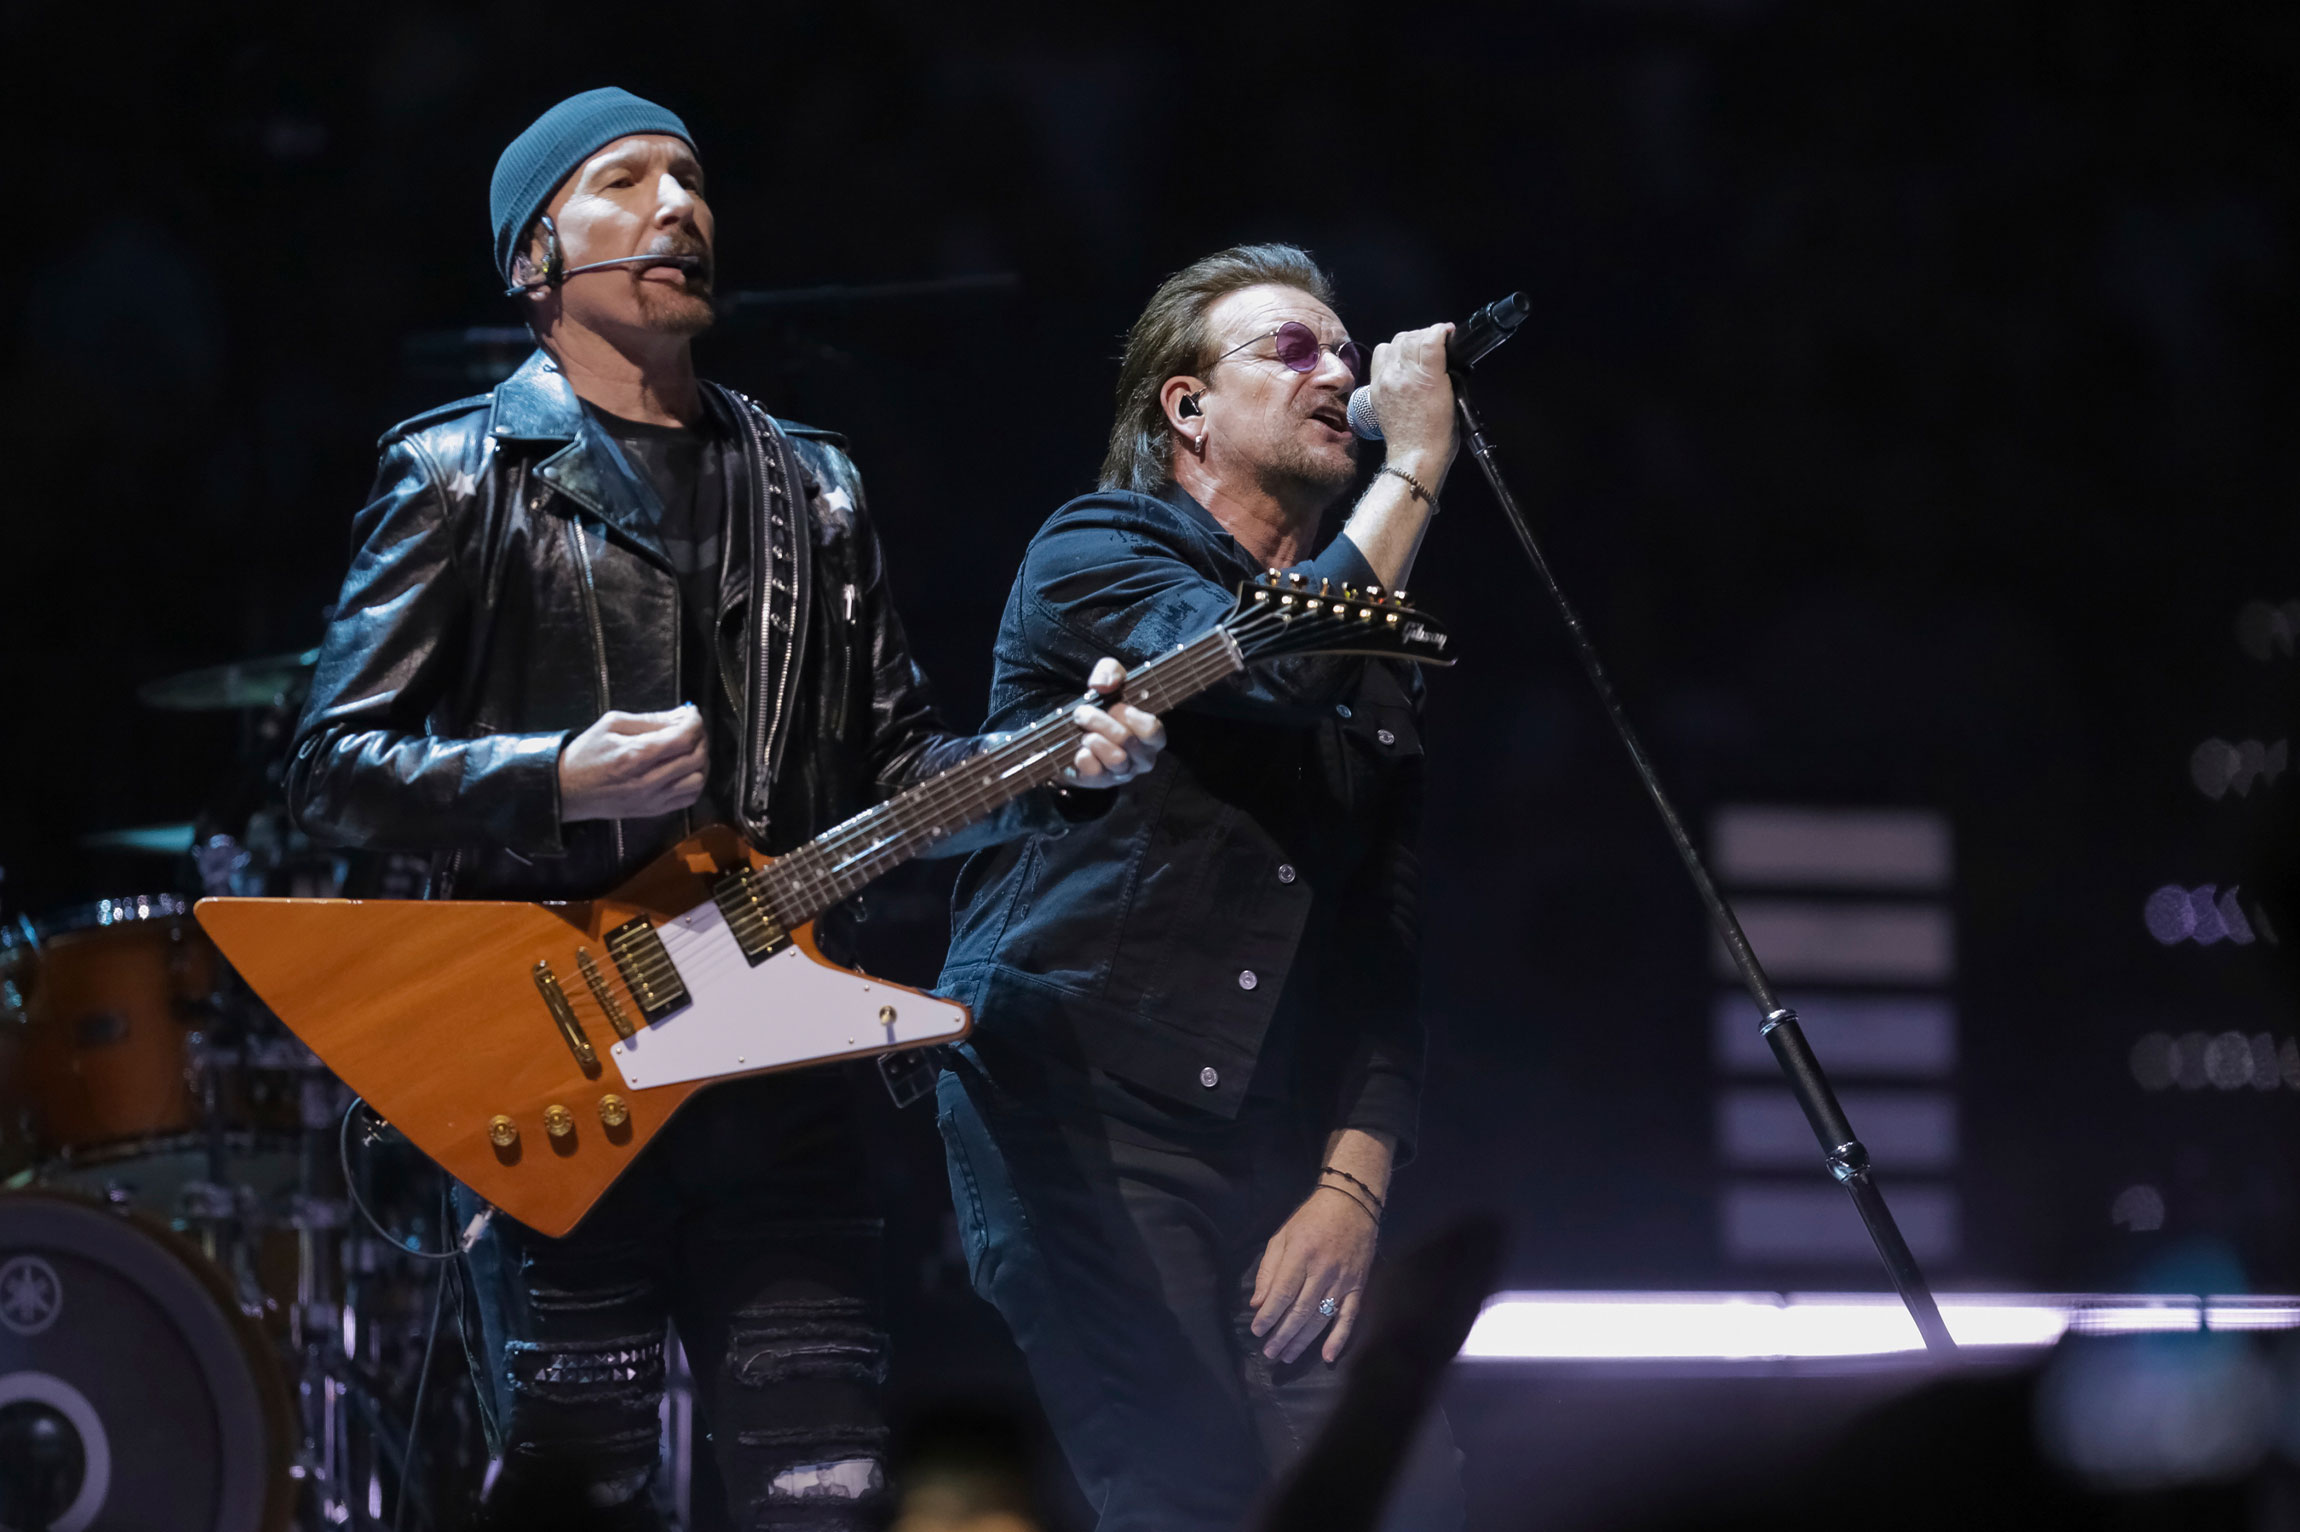 U2 debuts new song 'Atomic City' with Downtown Las Vegas video shoot